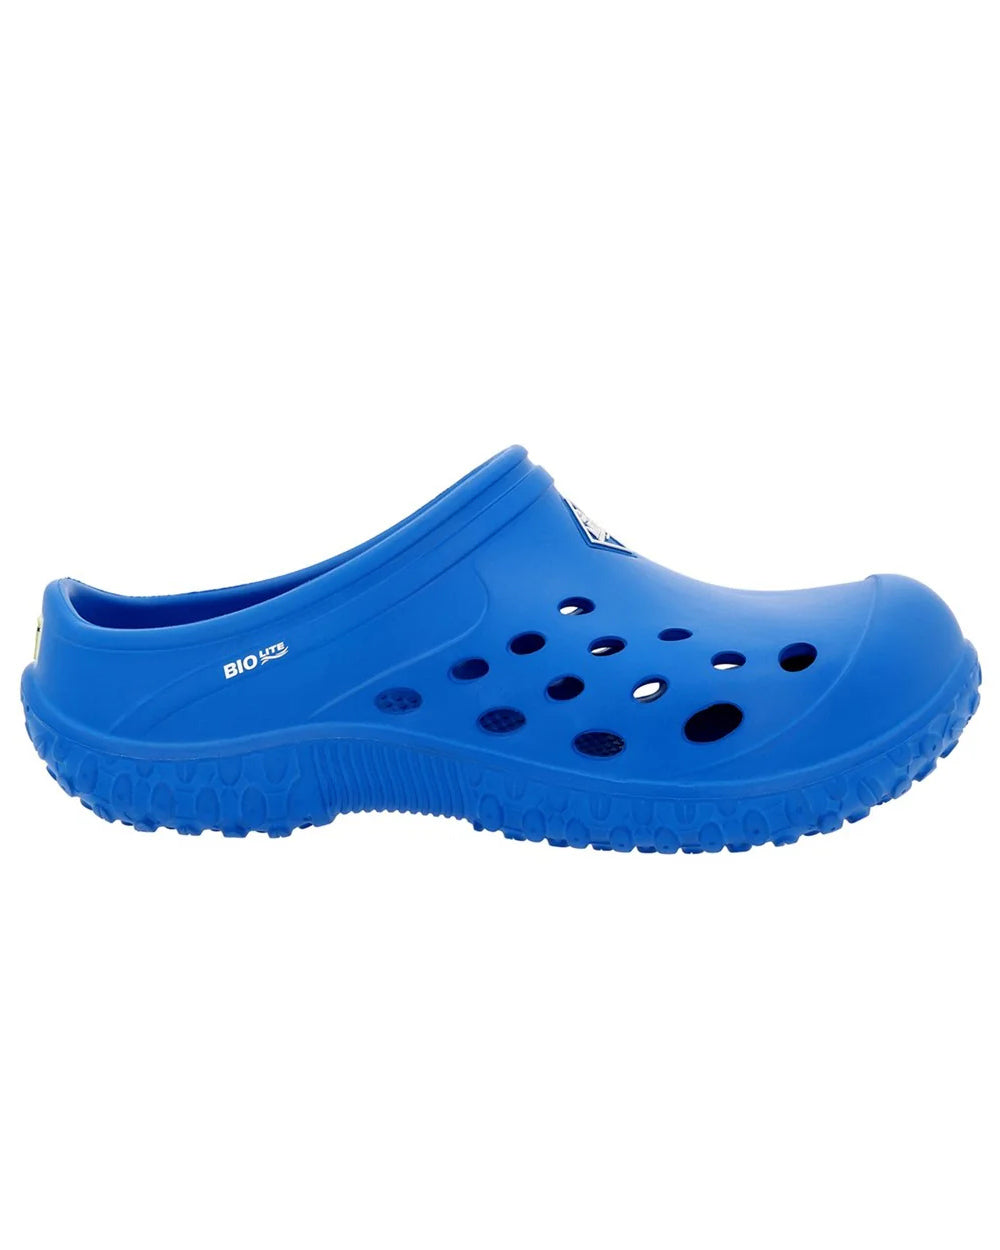 Blue Coloured Muck Boots Childrens Muckster Lite Clogs On A White Background 